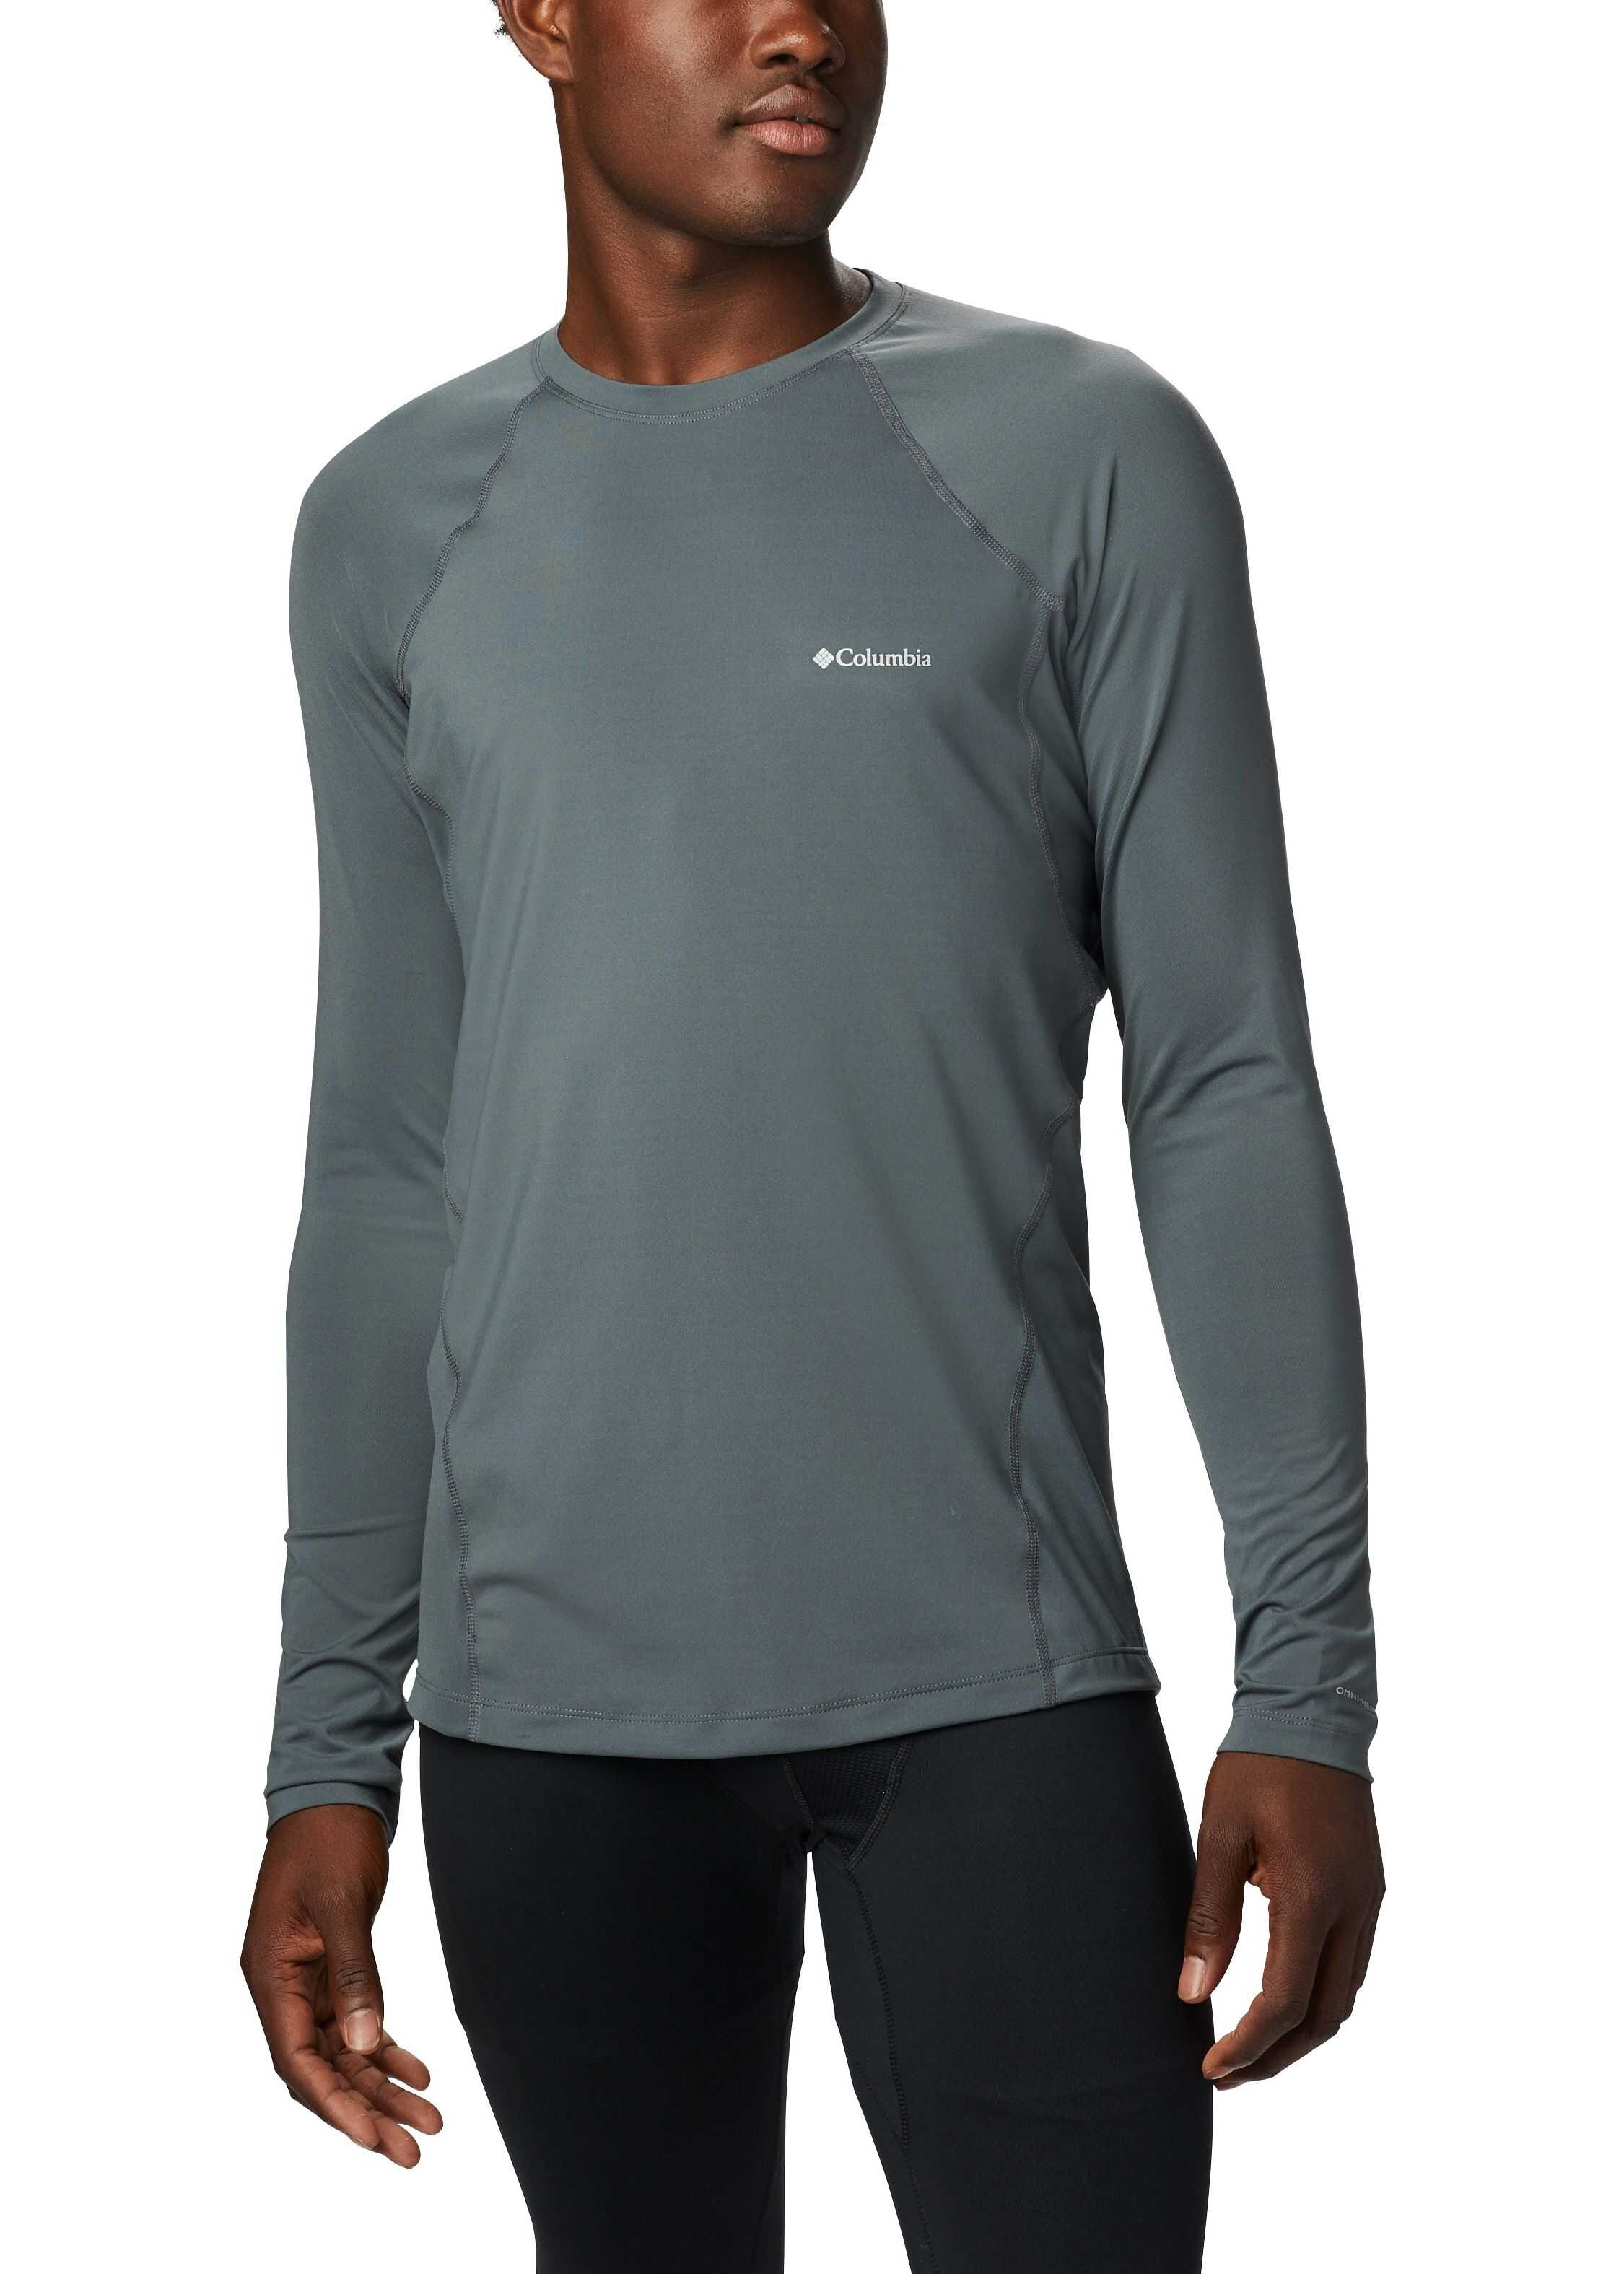 Columbia Midweight Stretch Ls Top AM6323 Graphite